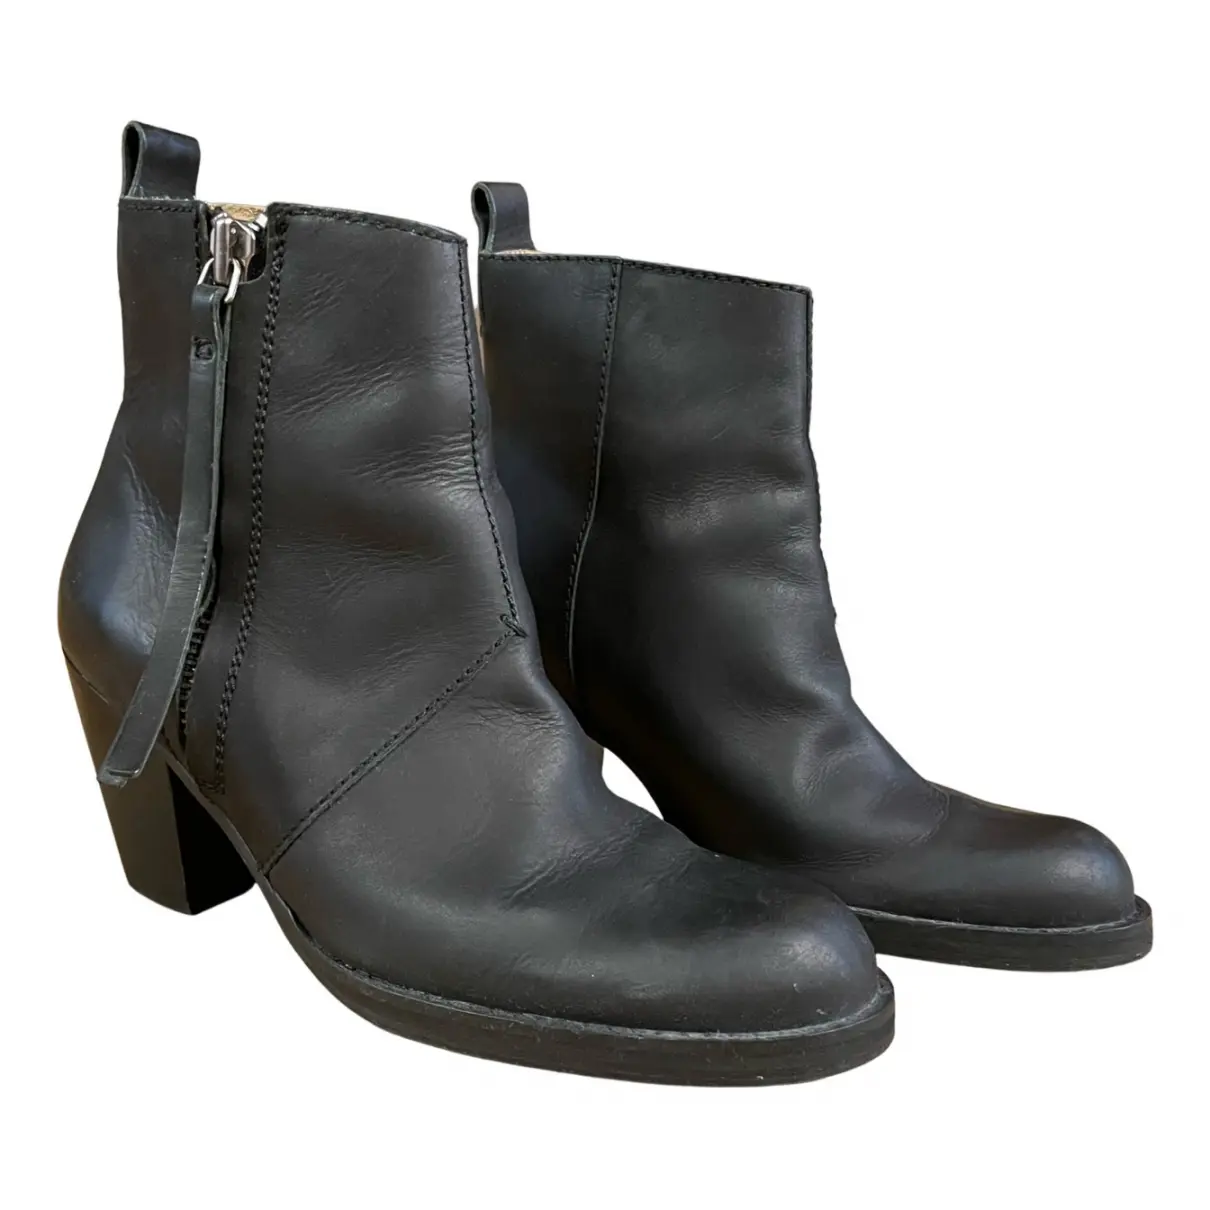 Pistol leather ankle boots Acne Studios